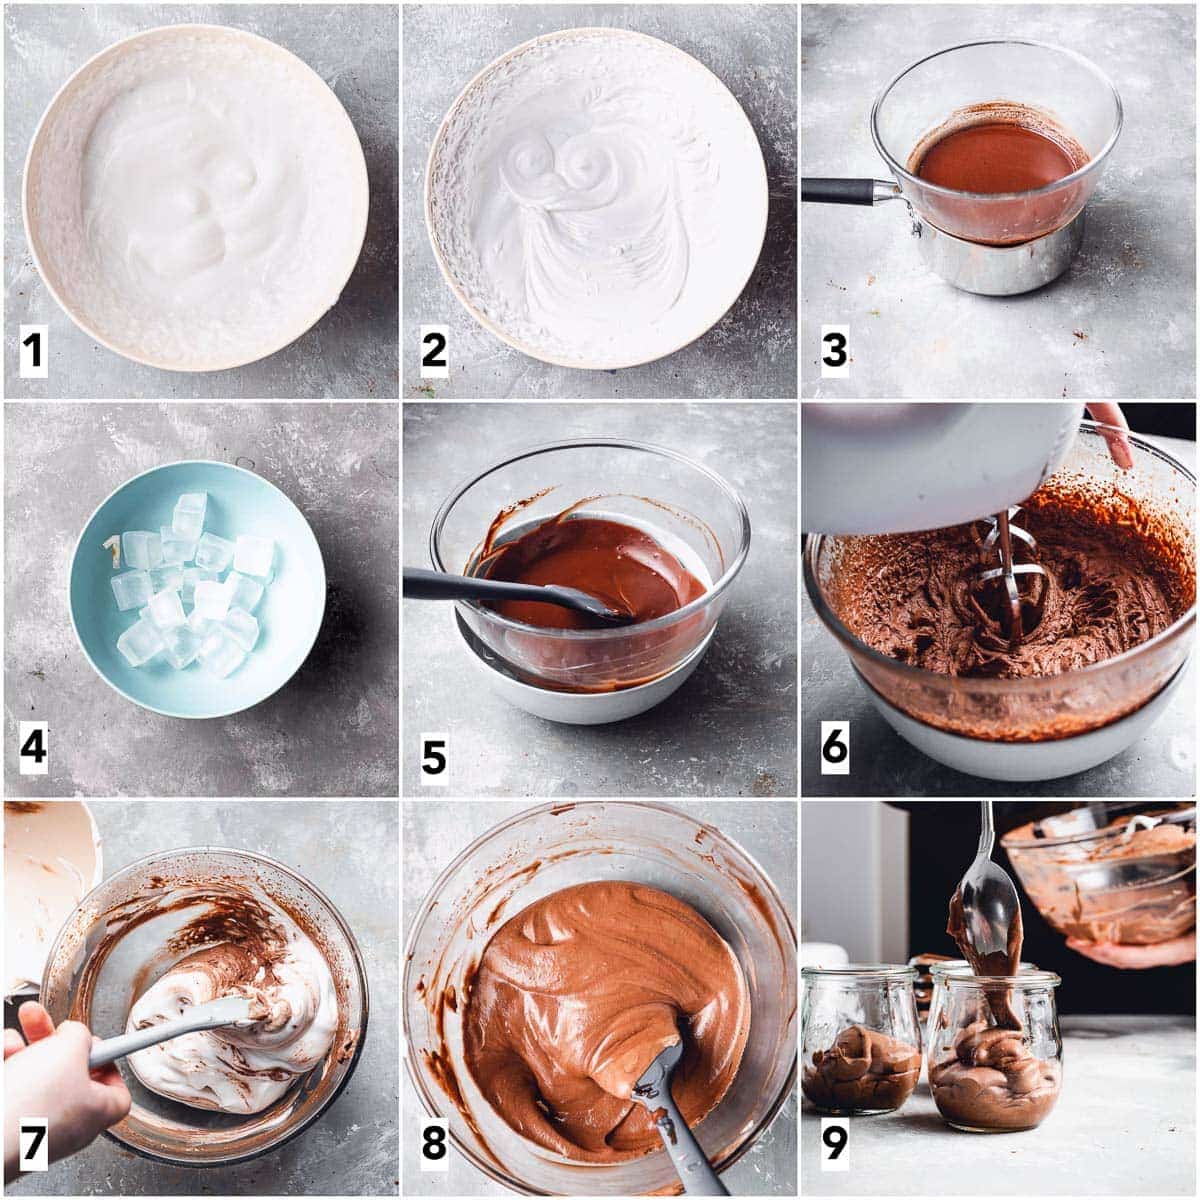 Nine steps in the making of chocolate mousse.